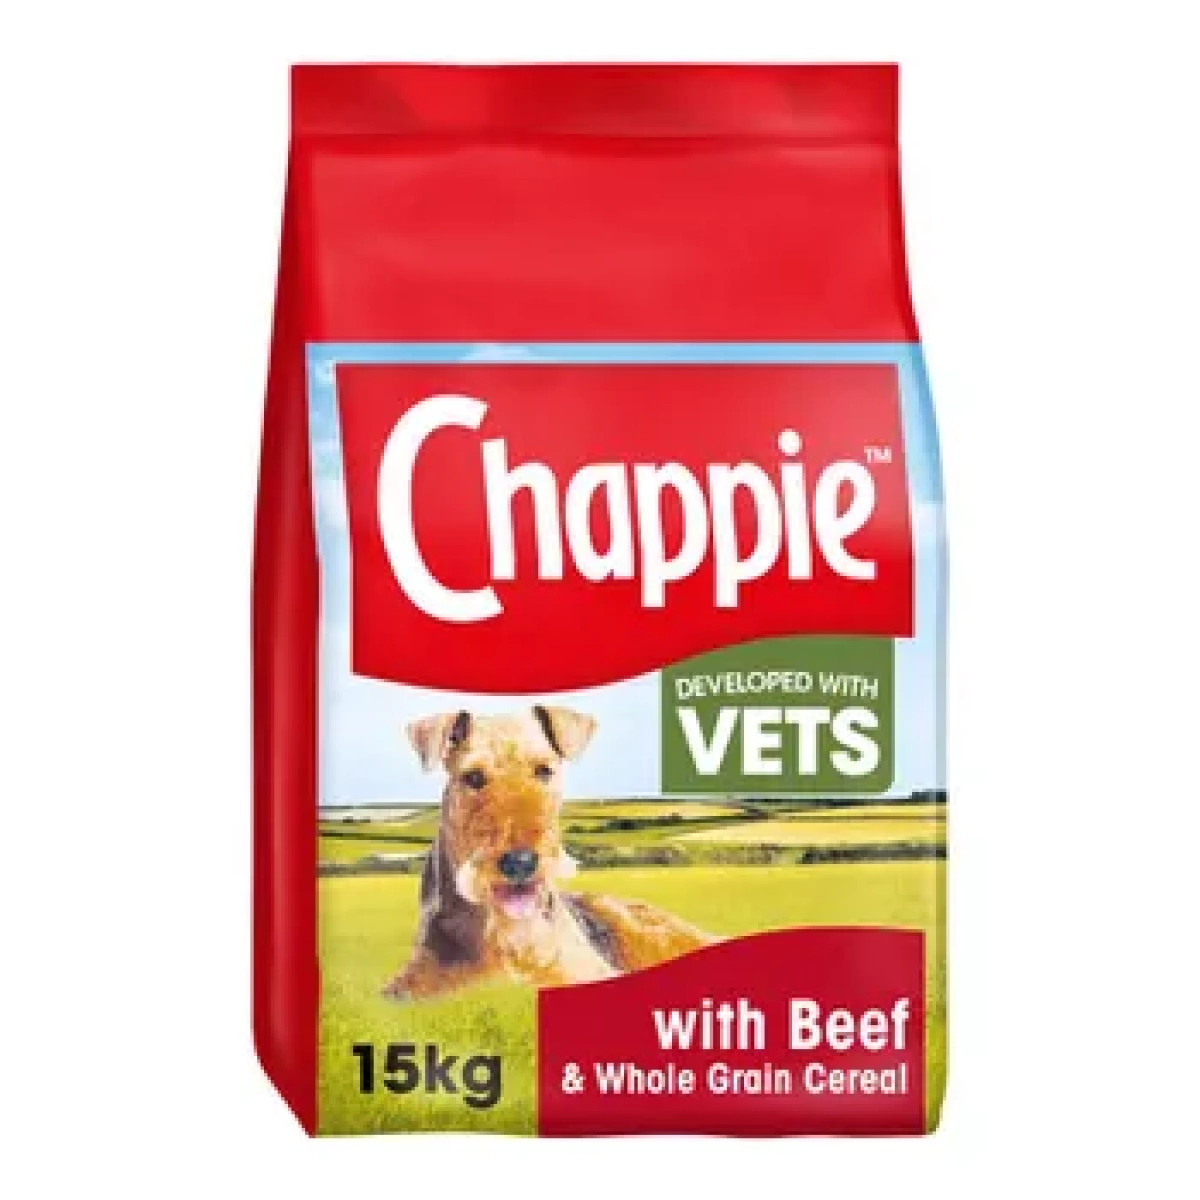 Chappie Beef 15kg – Pawfect Supplies Ltd Product Image